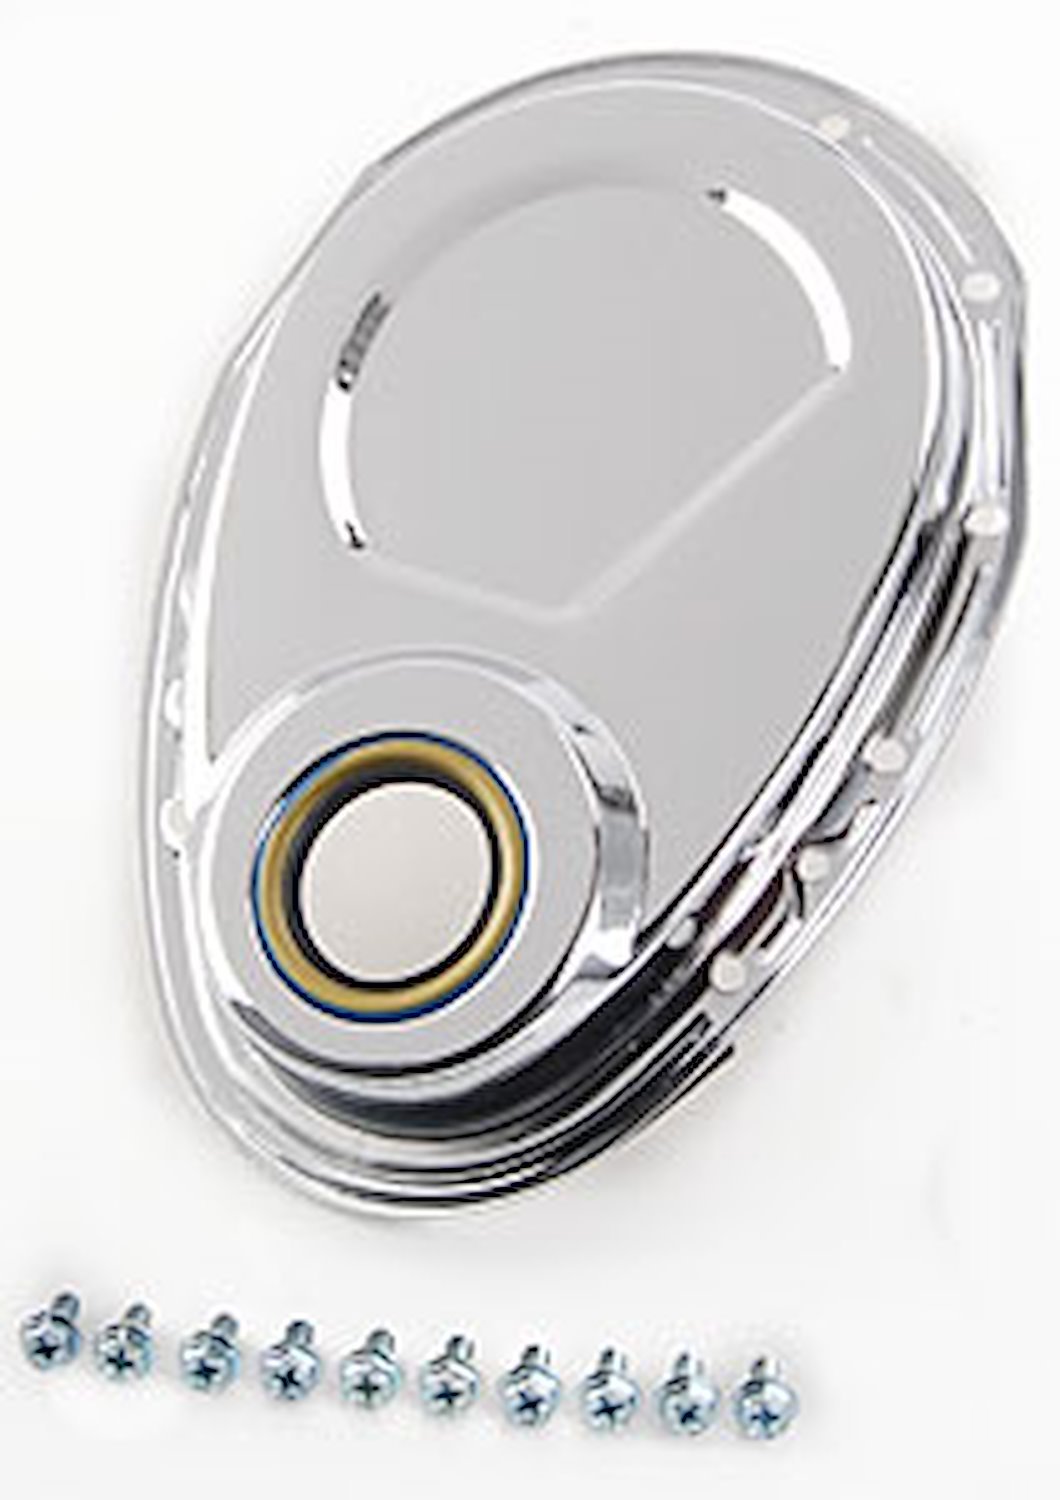 Chrome Timing Chain Cover 1967-1995 Small Block Chevy